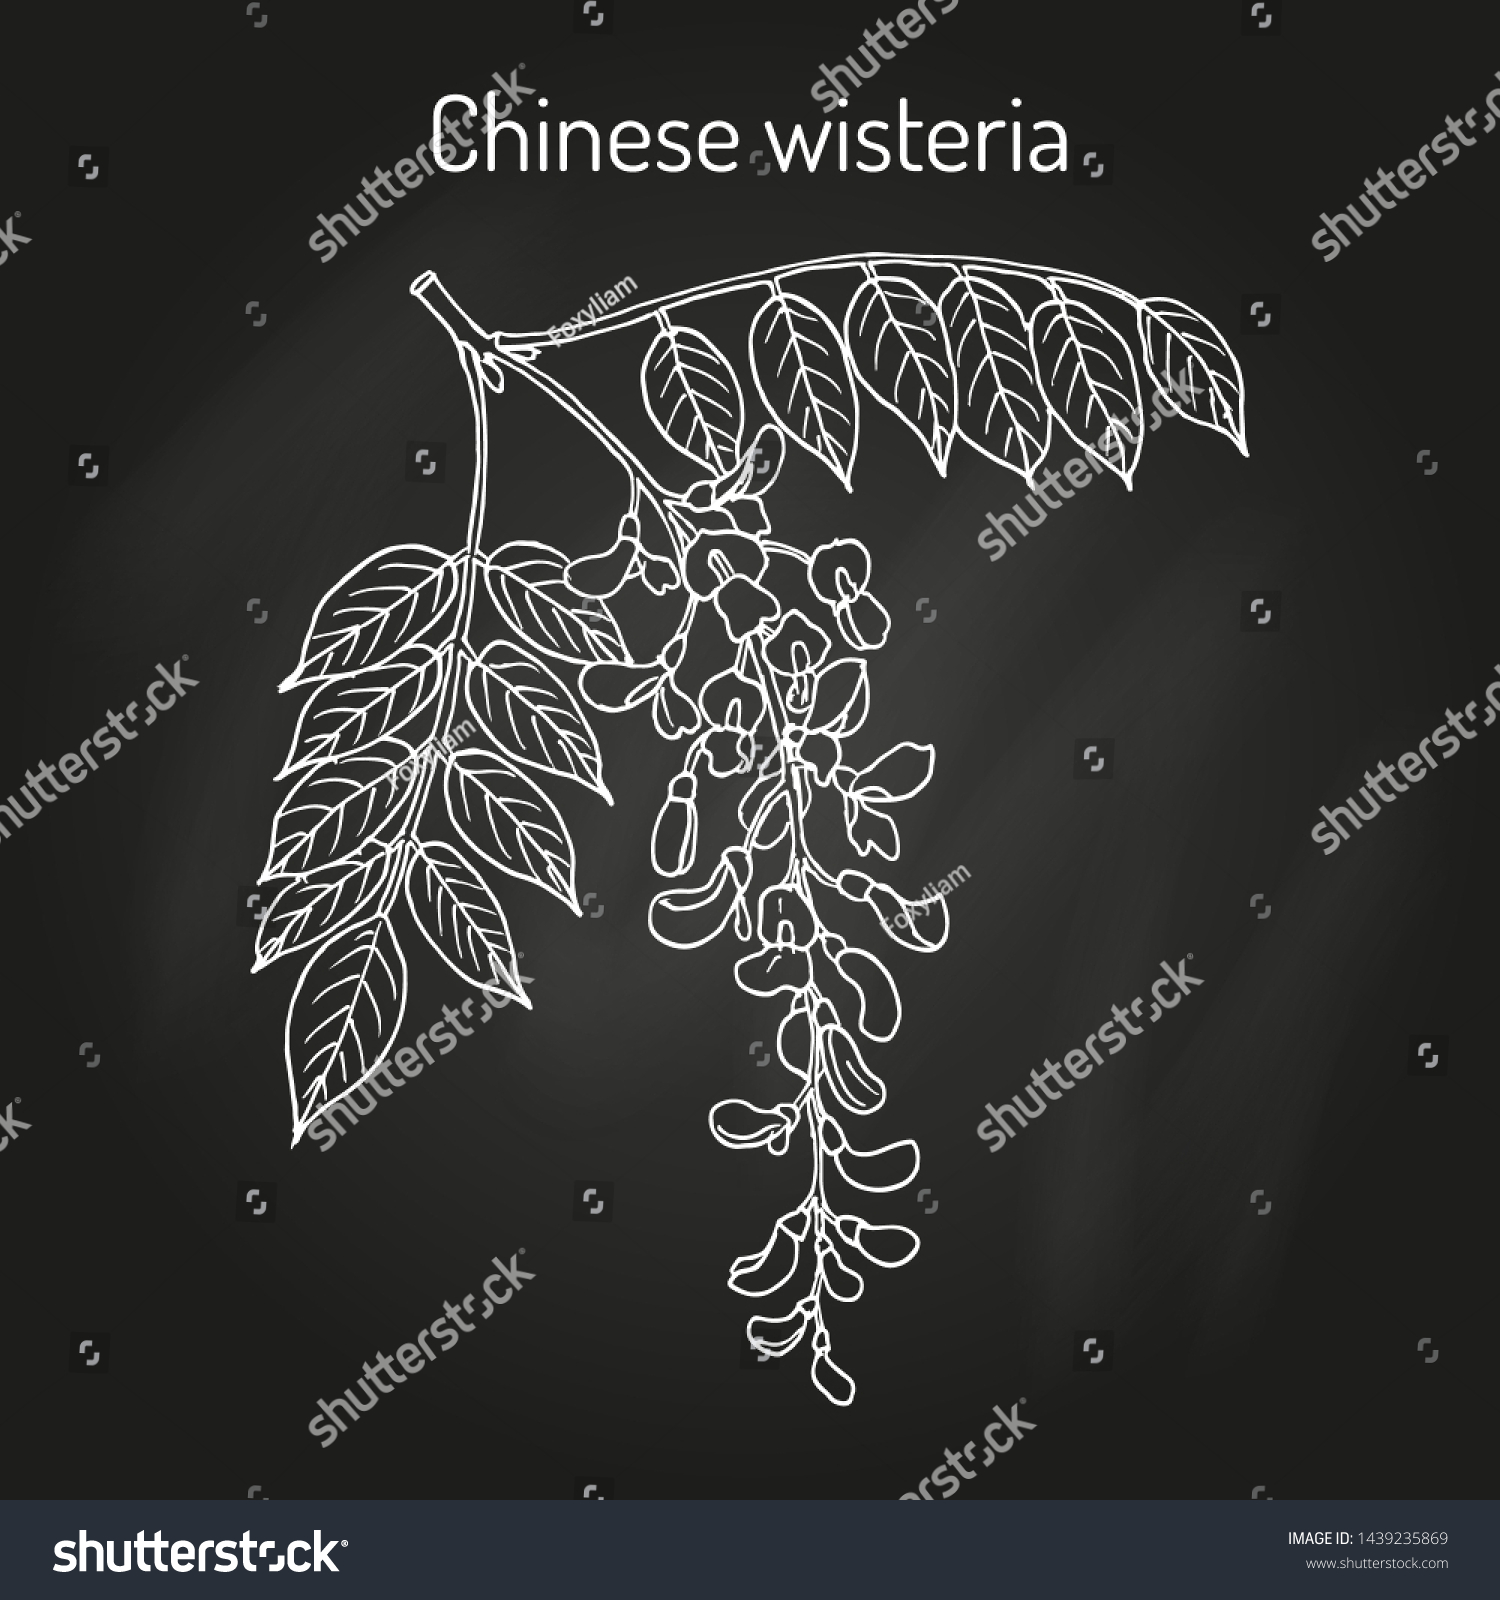 SVG of Chinese wisteria (Wisteria sinensis), ornamental and medicinal plant. Hand drawn botanical vector illustration svg